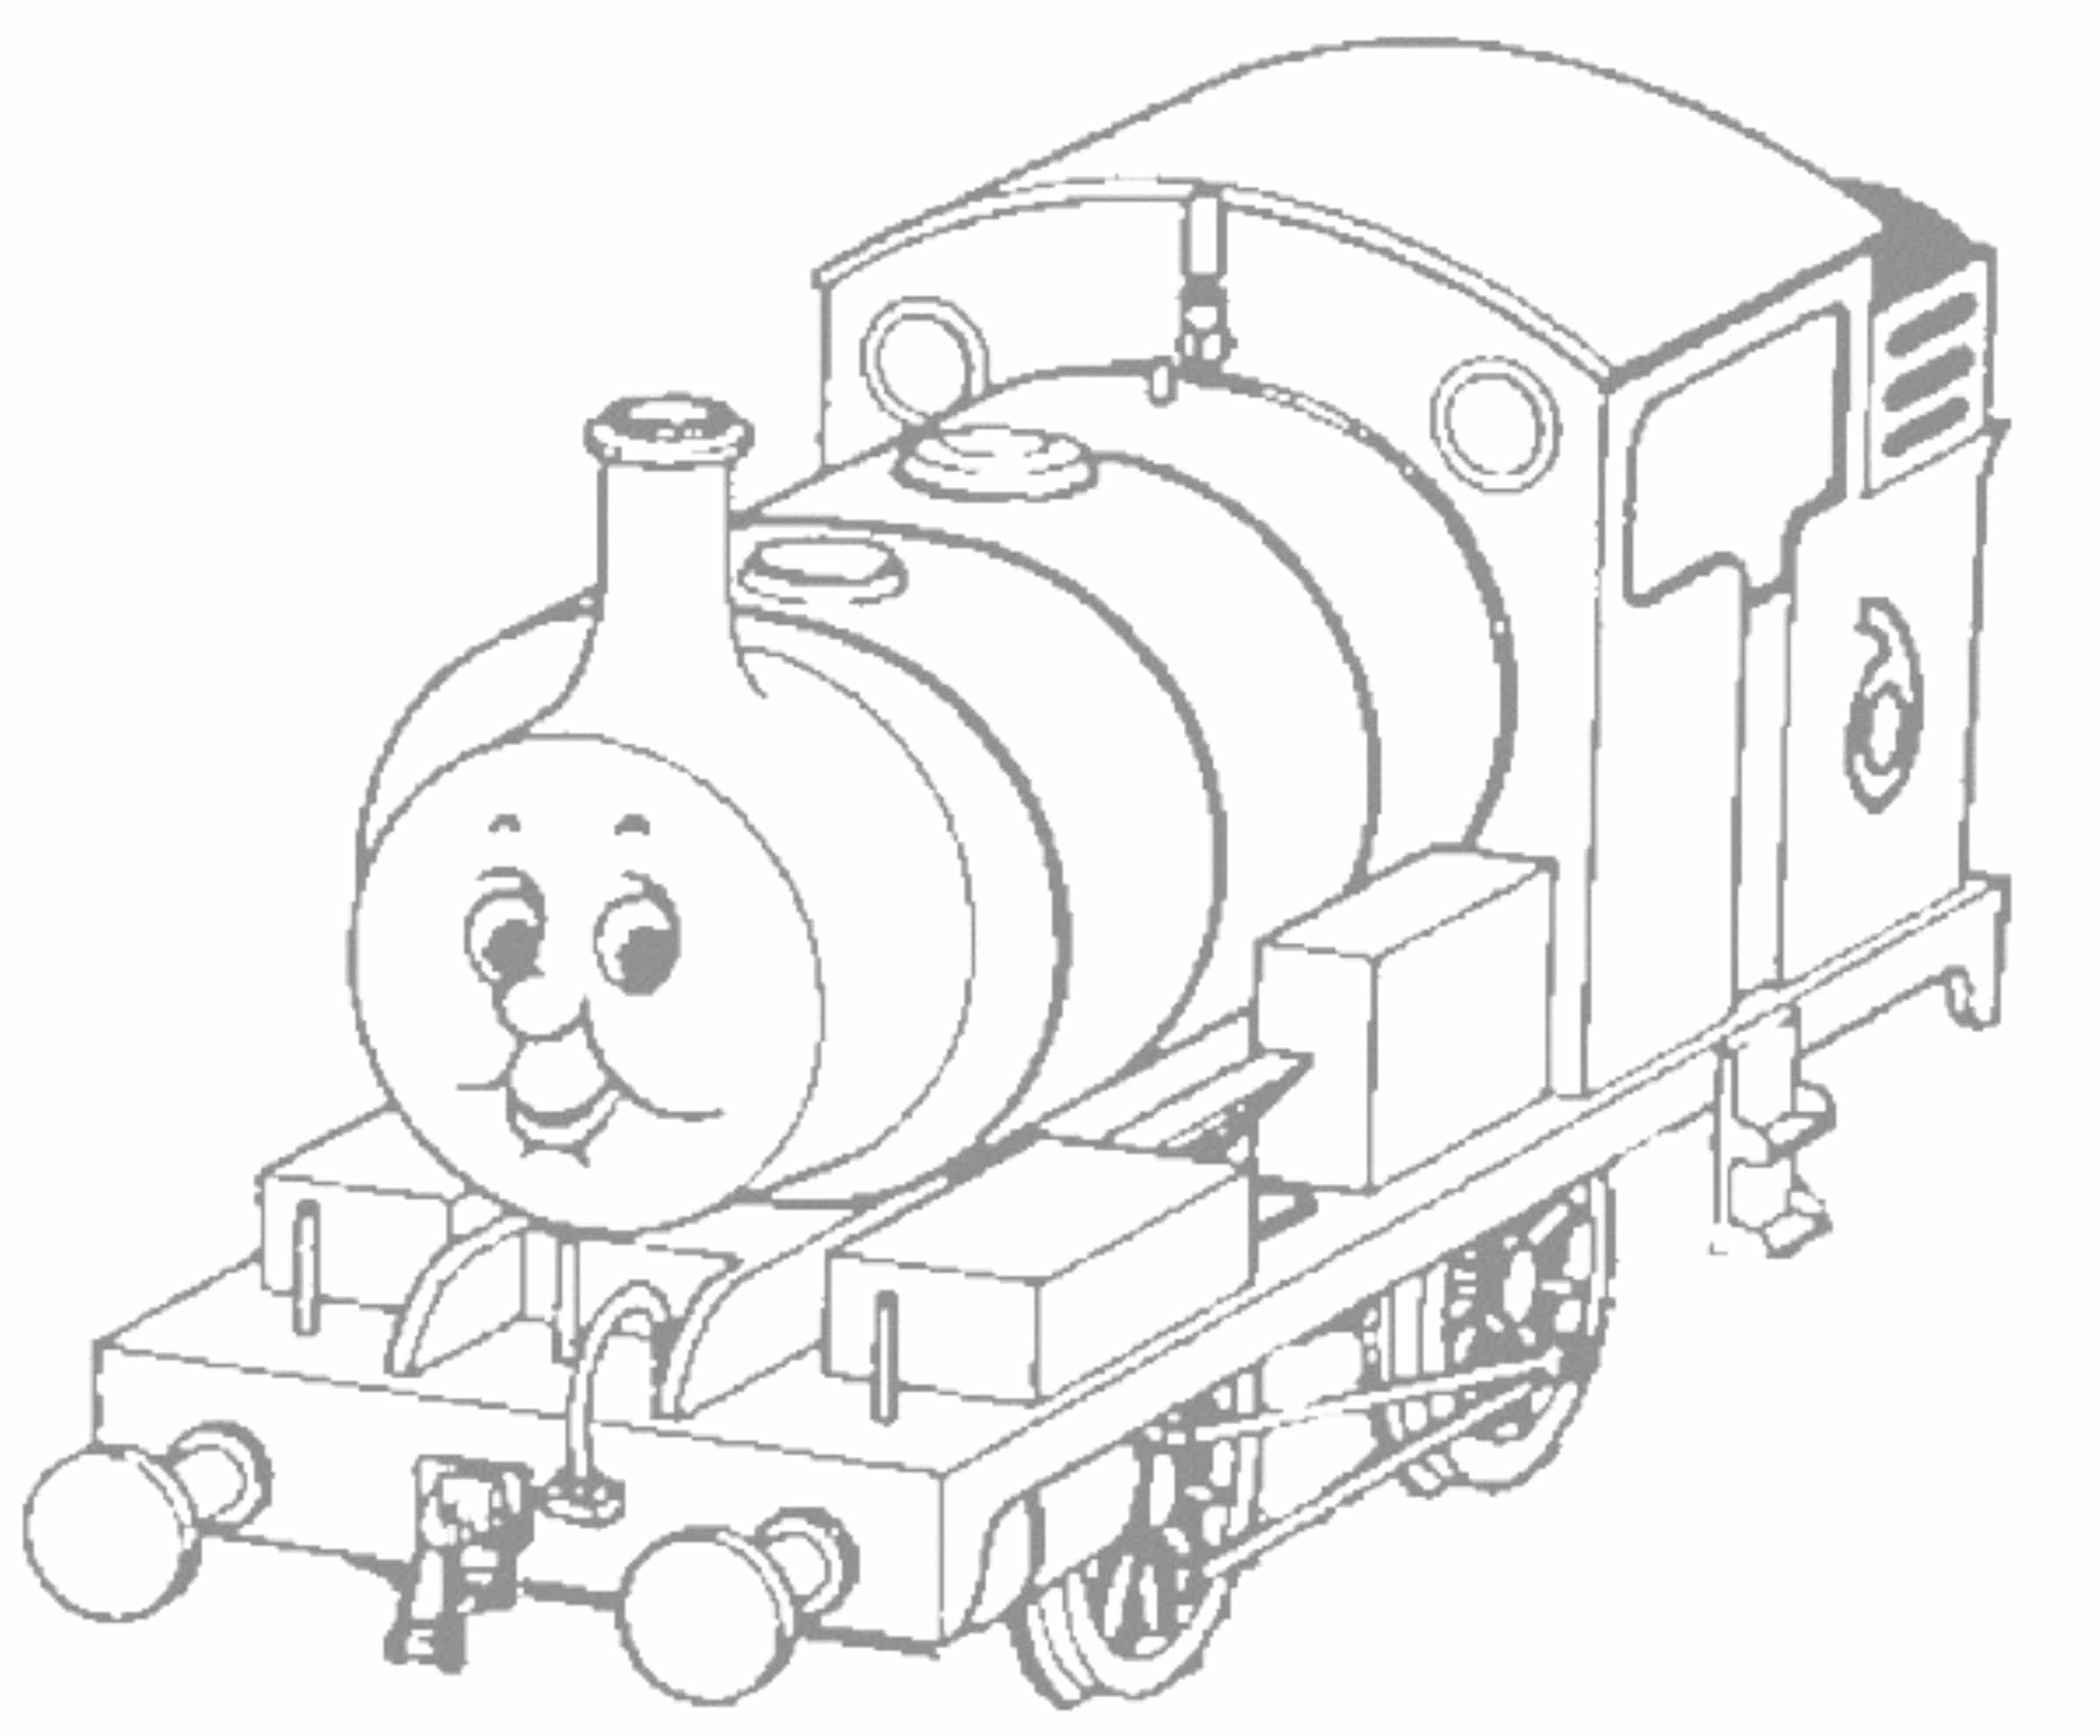 Thomas The Train Printable Coloring Pages
 Print & Download Thomas the Train Theme Coloring Pages